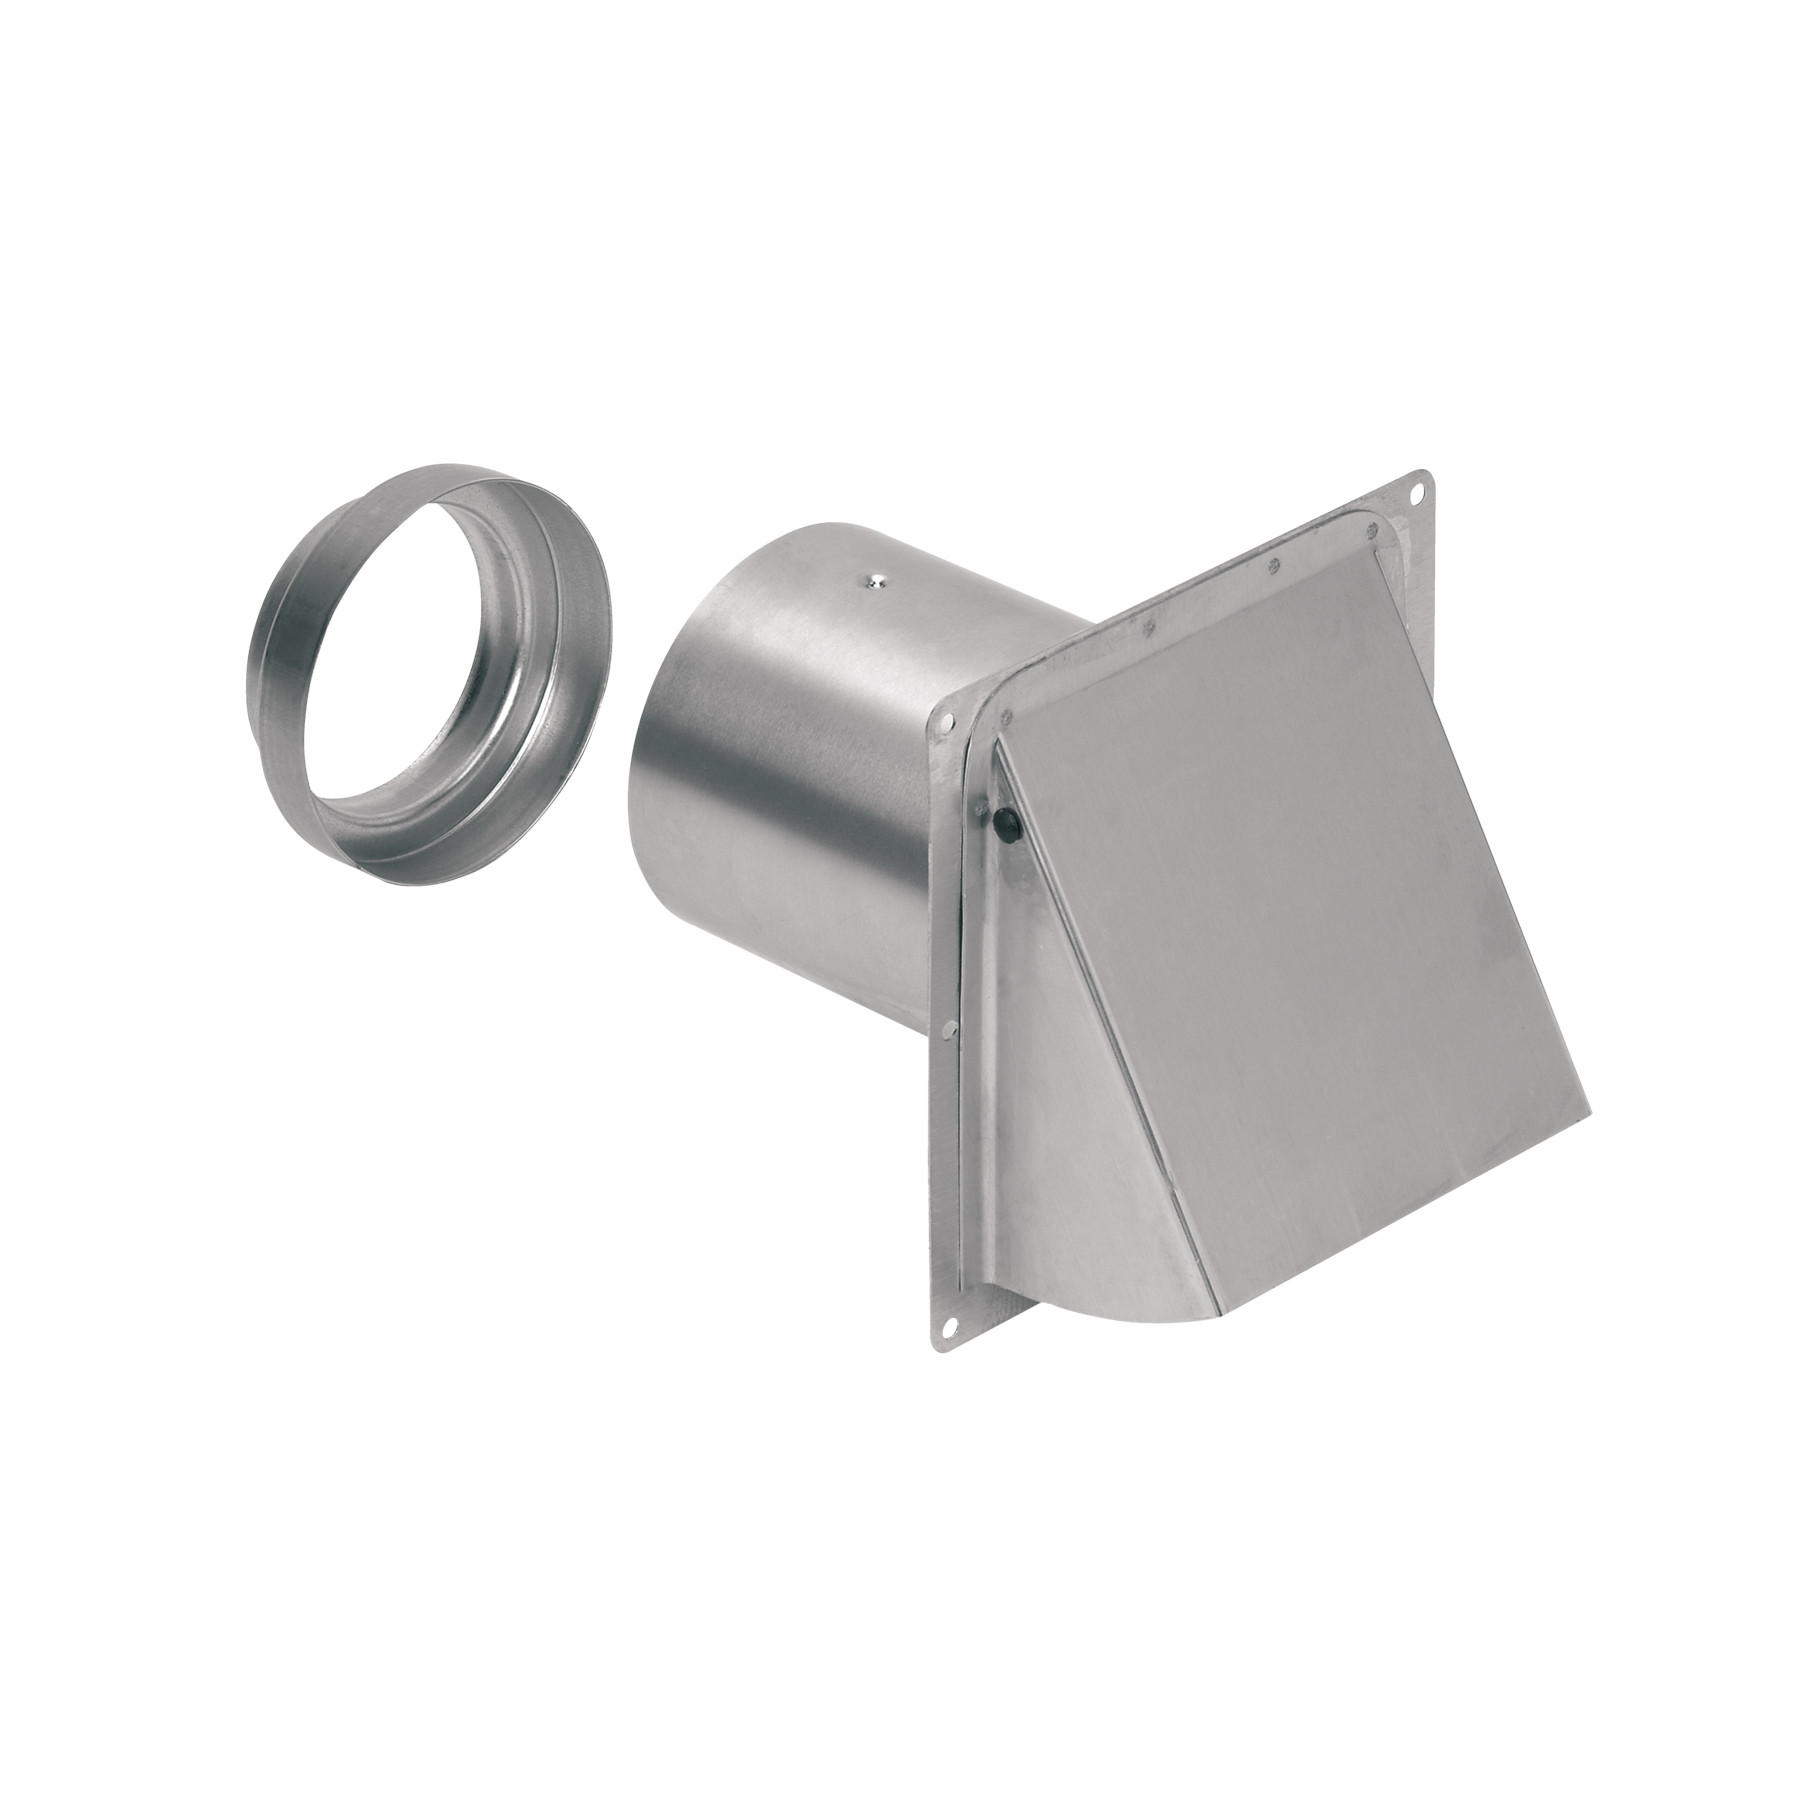 Wall Cap, Aluminum, for 3-Inch and 4-Inch round duct